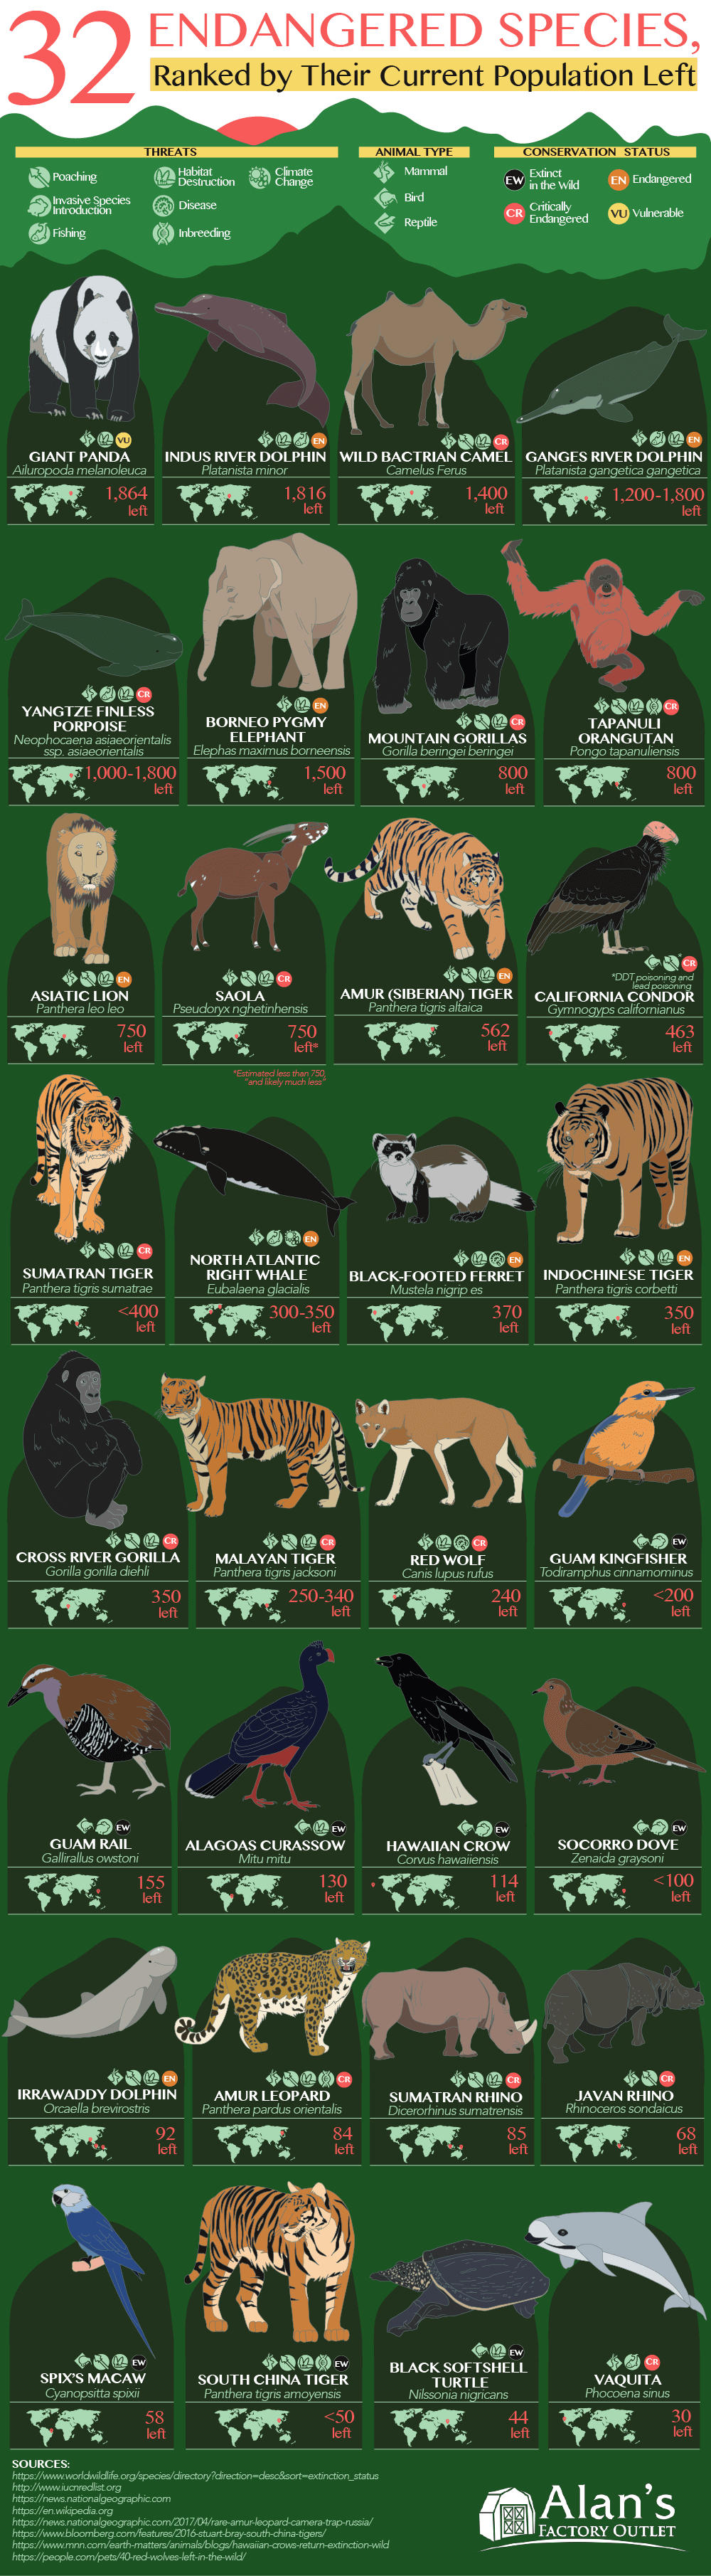 World's 32 Most Endangered Animals Ranked By Number Left | Daily Infographic